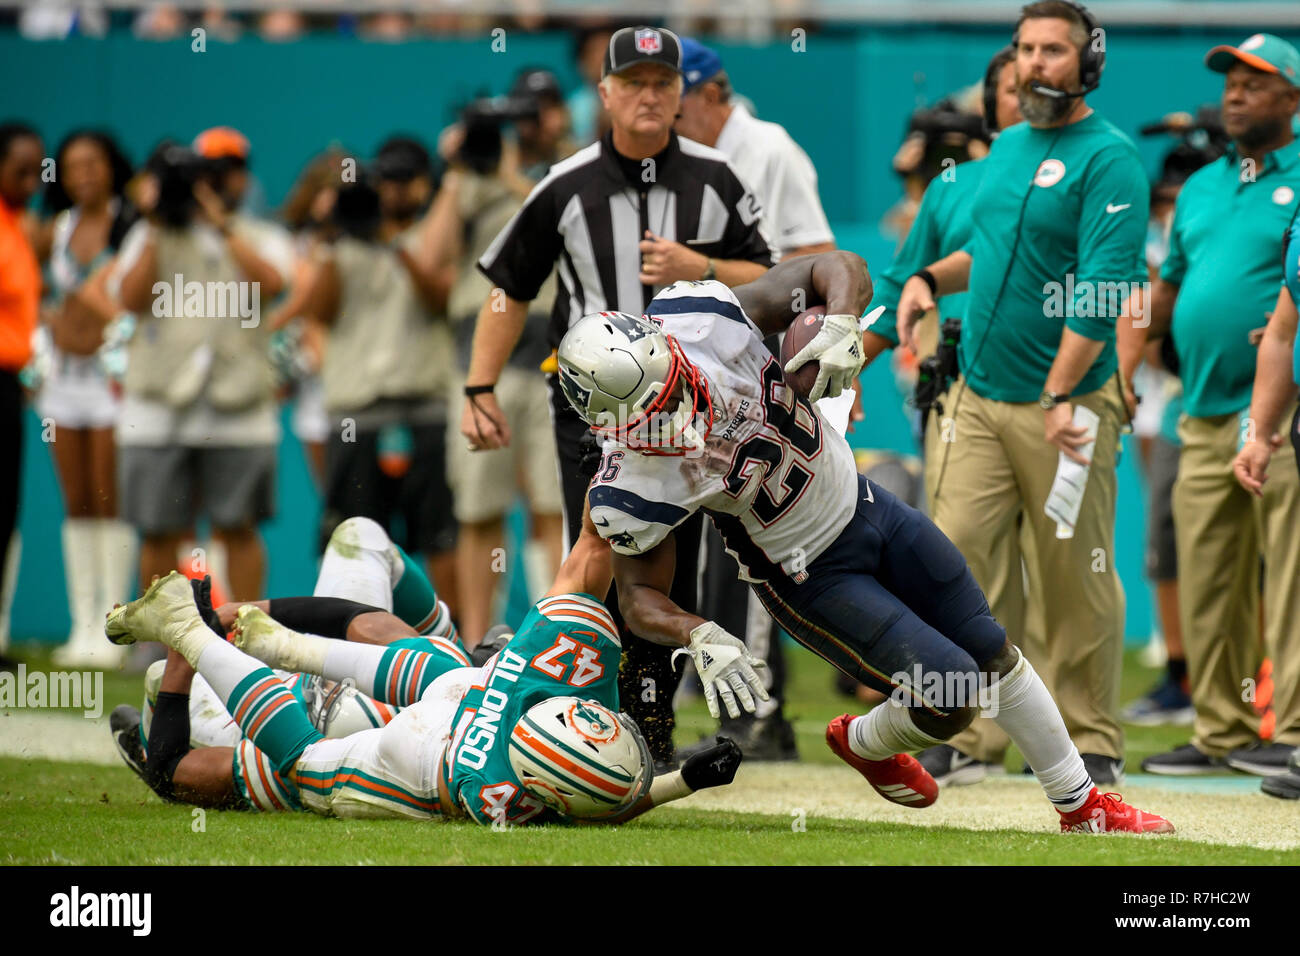 Kiko alonso hi-res stock photography and images - Alamy